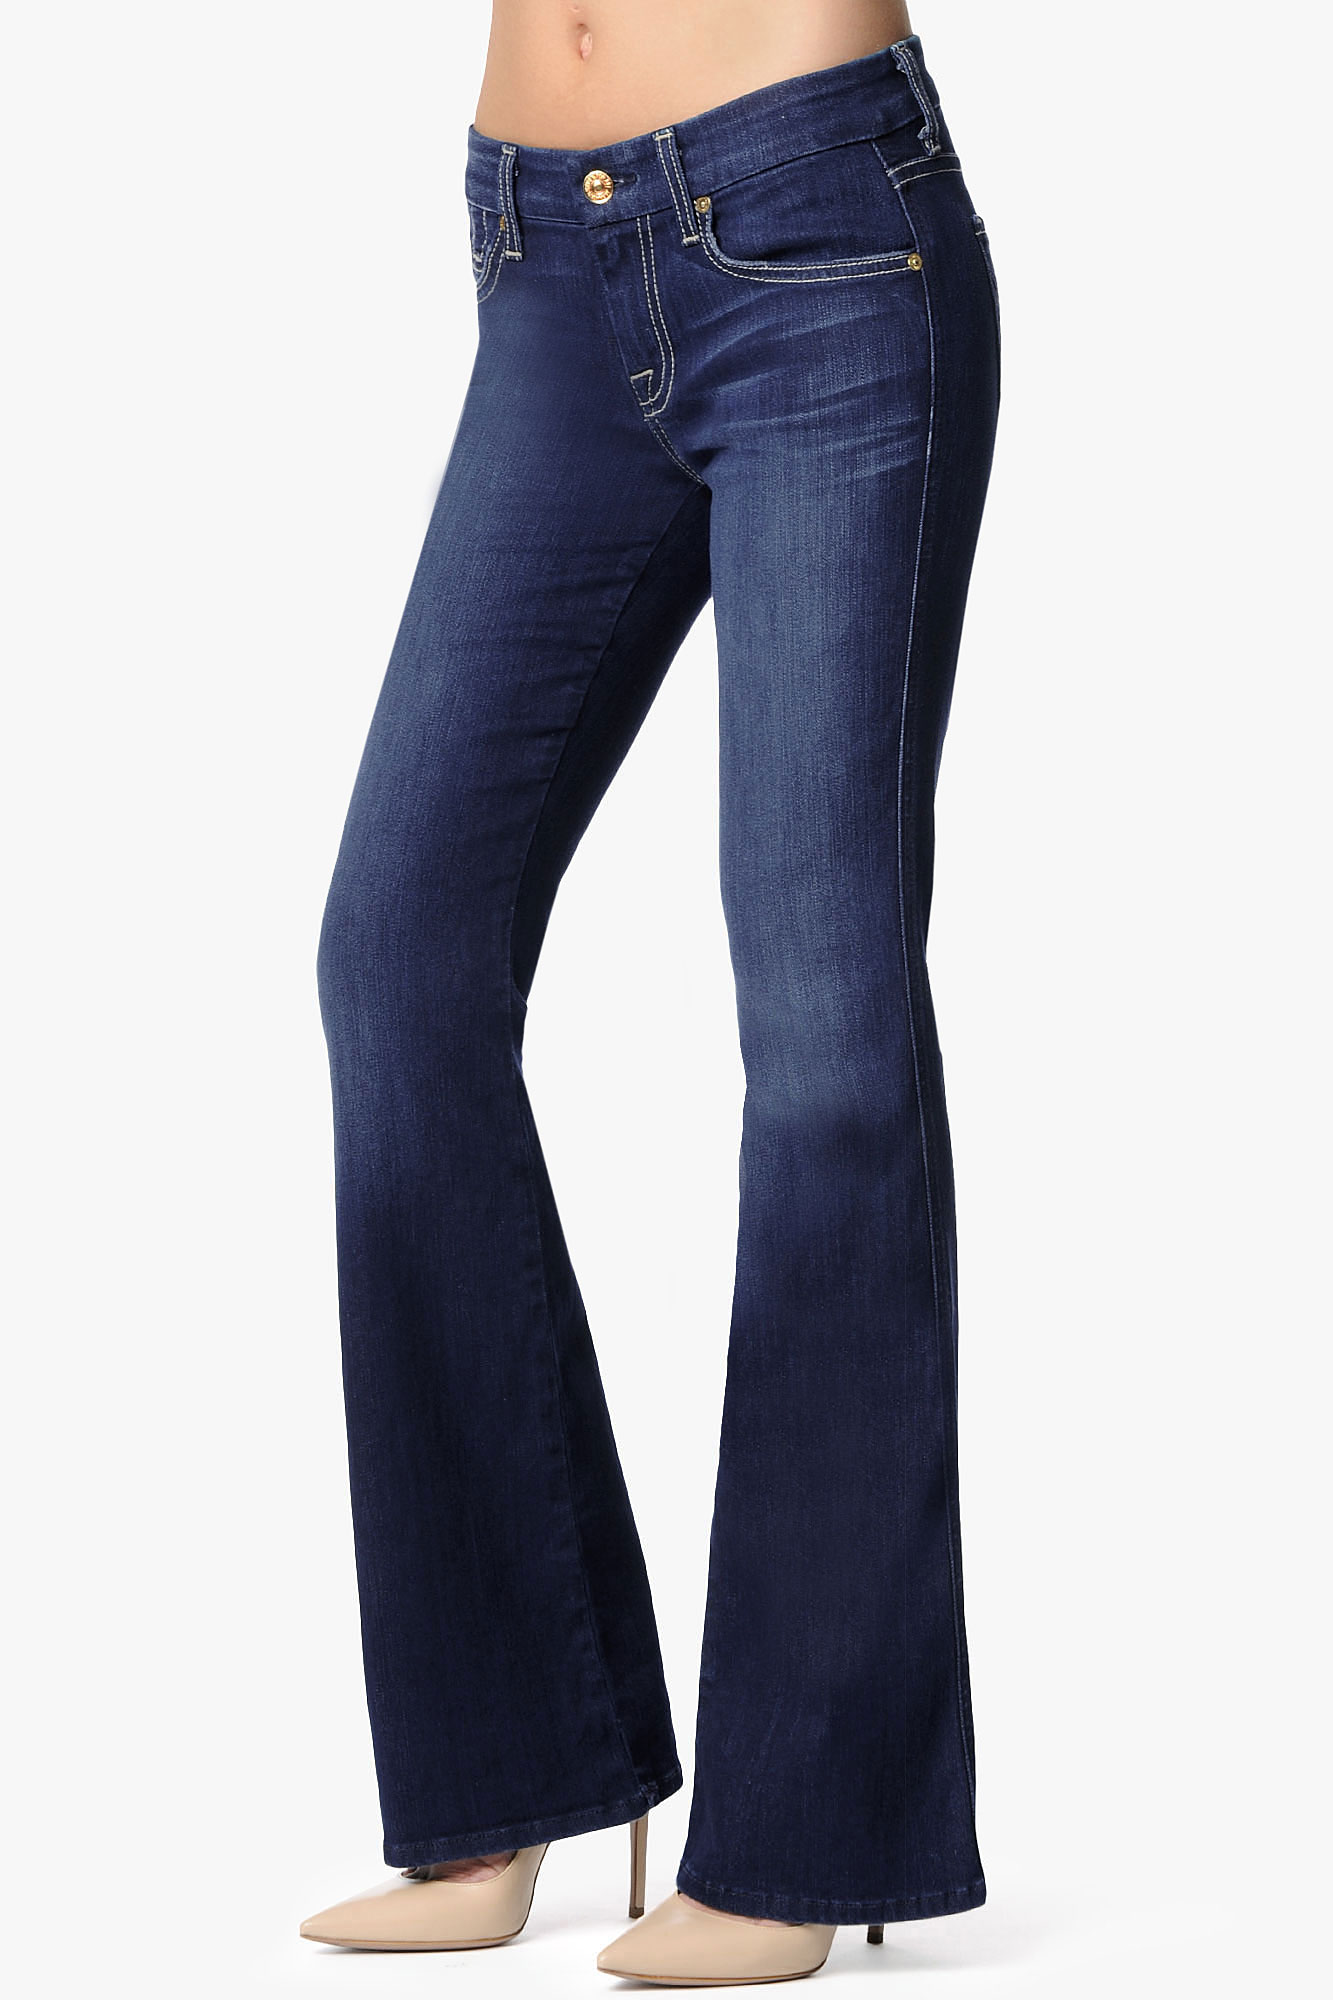 Lyst - 7 for all mankind Lexie Petite A-Pocket Flare in Blue